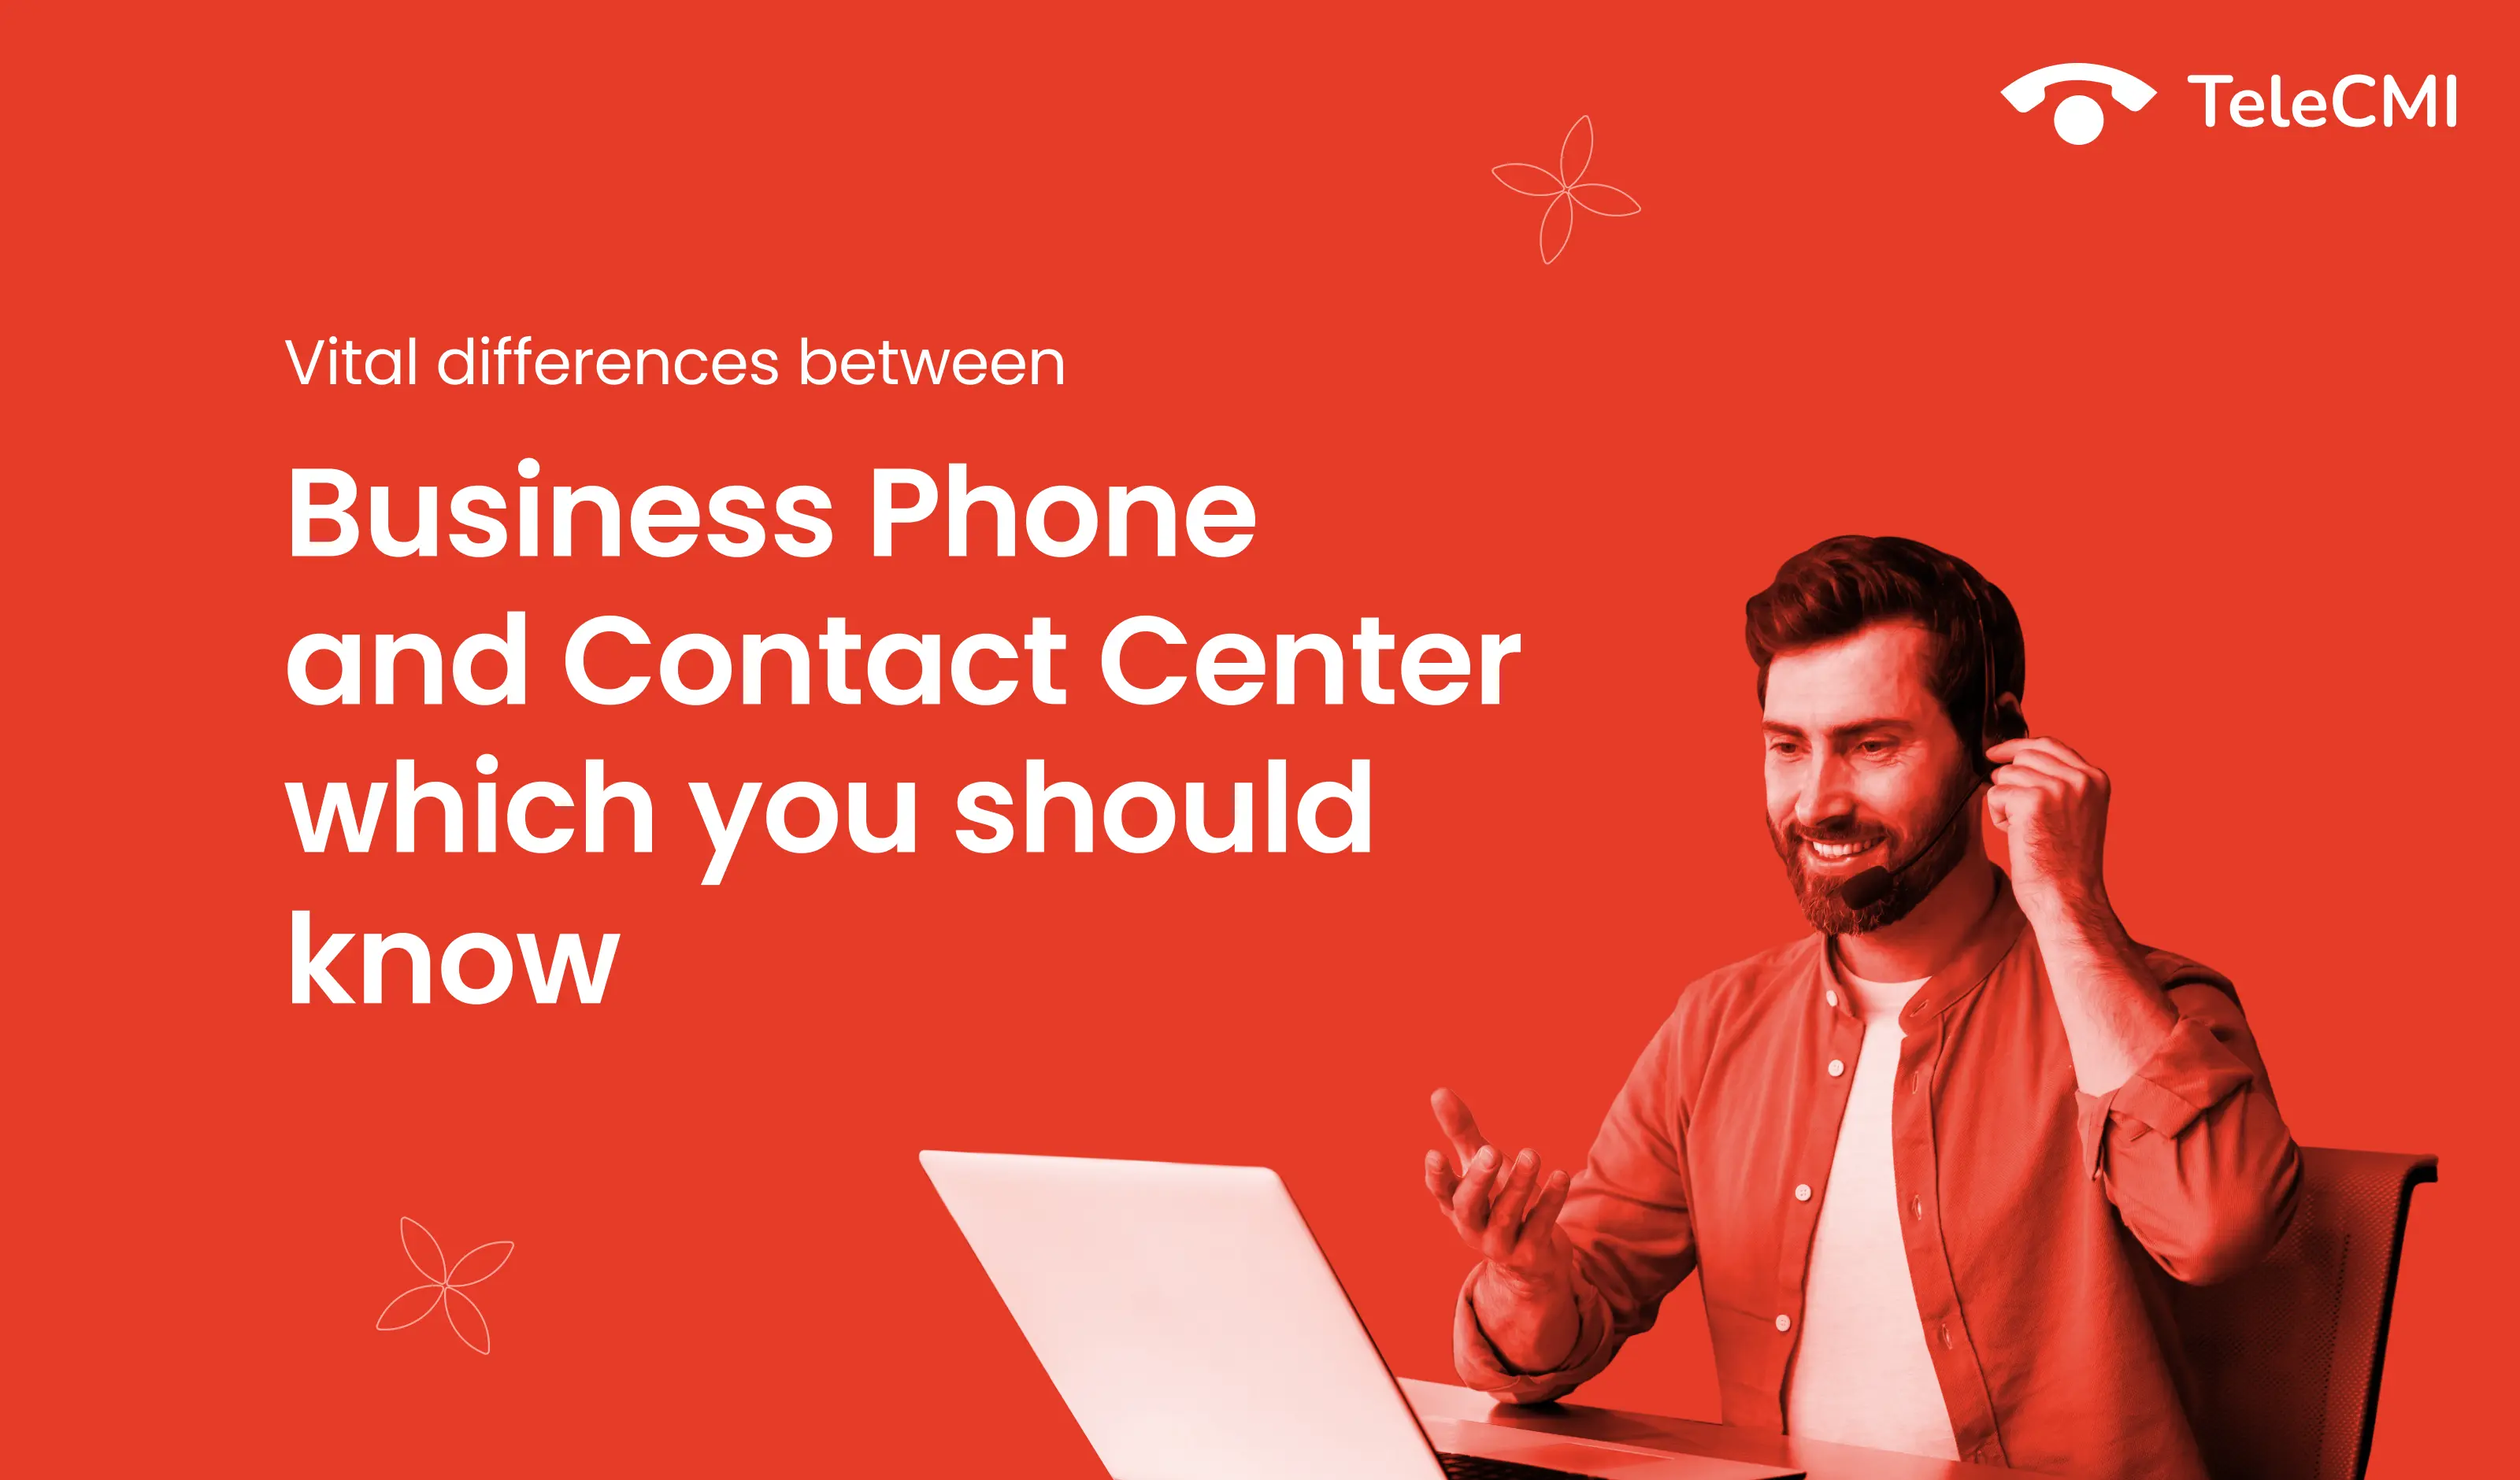 Vital differences between Business Phone and Contact Center which you should know